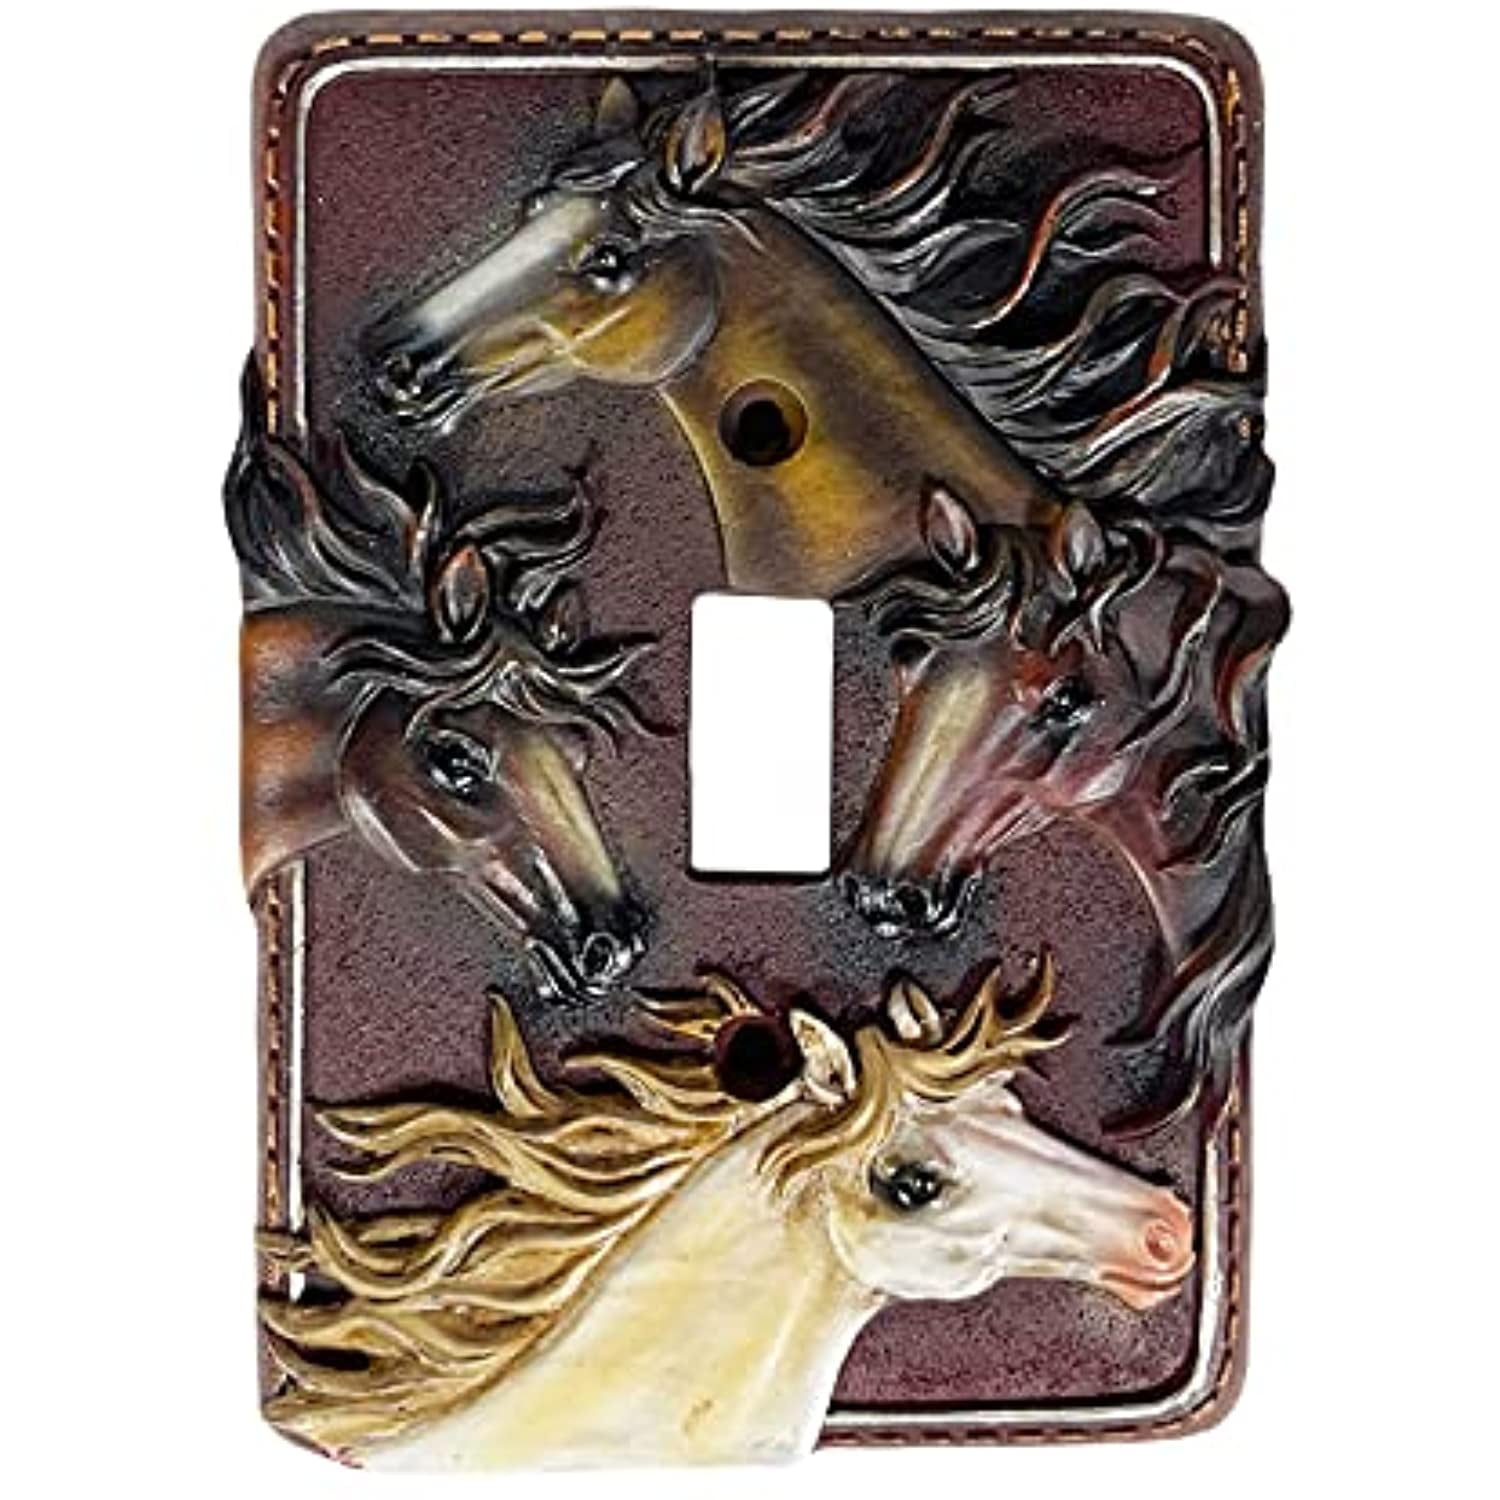 Decoration Wallplate Double Outlet Wall Plate/Panel Plate/Cover Light Panel Cover Watercolor Ink Deer Stag Family Silhouette Pattern 2-Gang Device Receptacle Wallplate